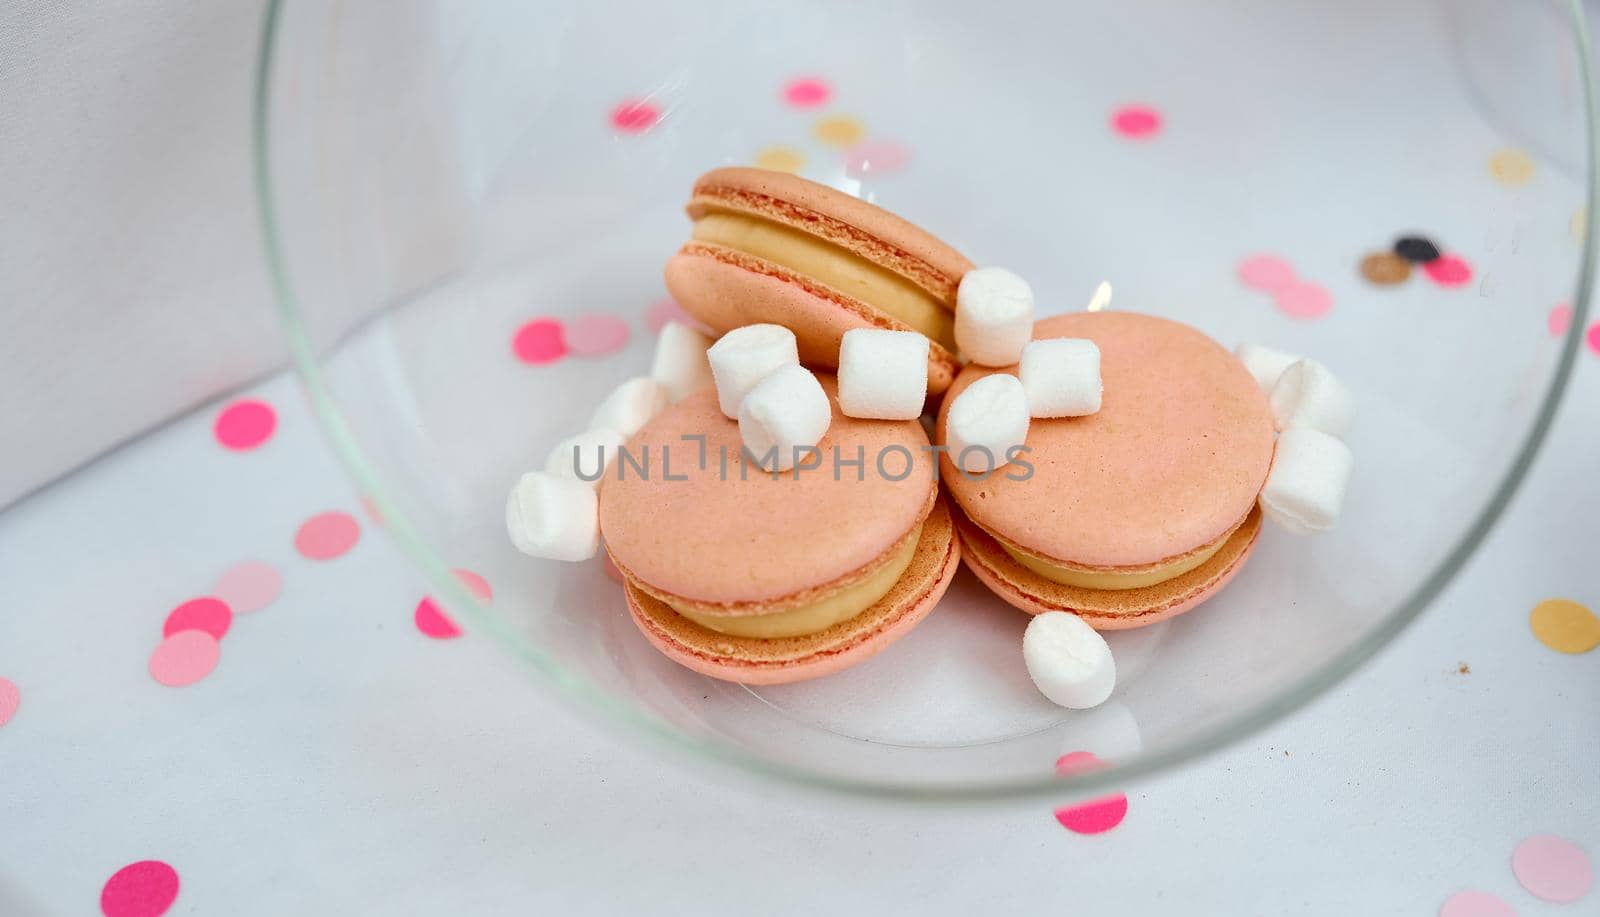 Colorful peach Macaroons with white marshmallows In A Glass Vase On White Table. High quality photo